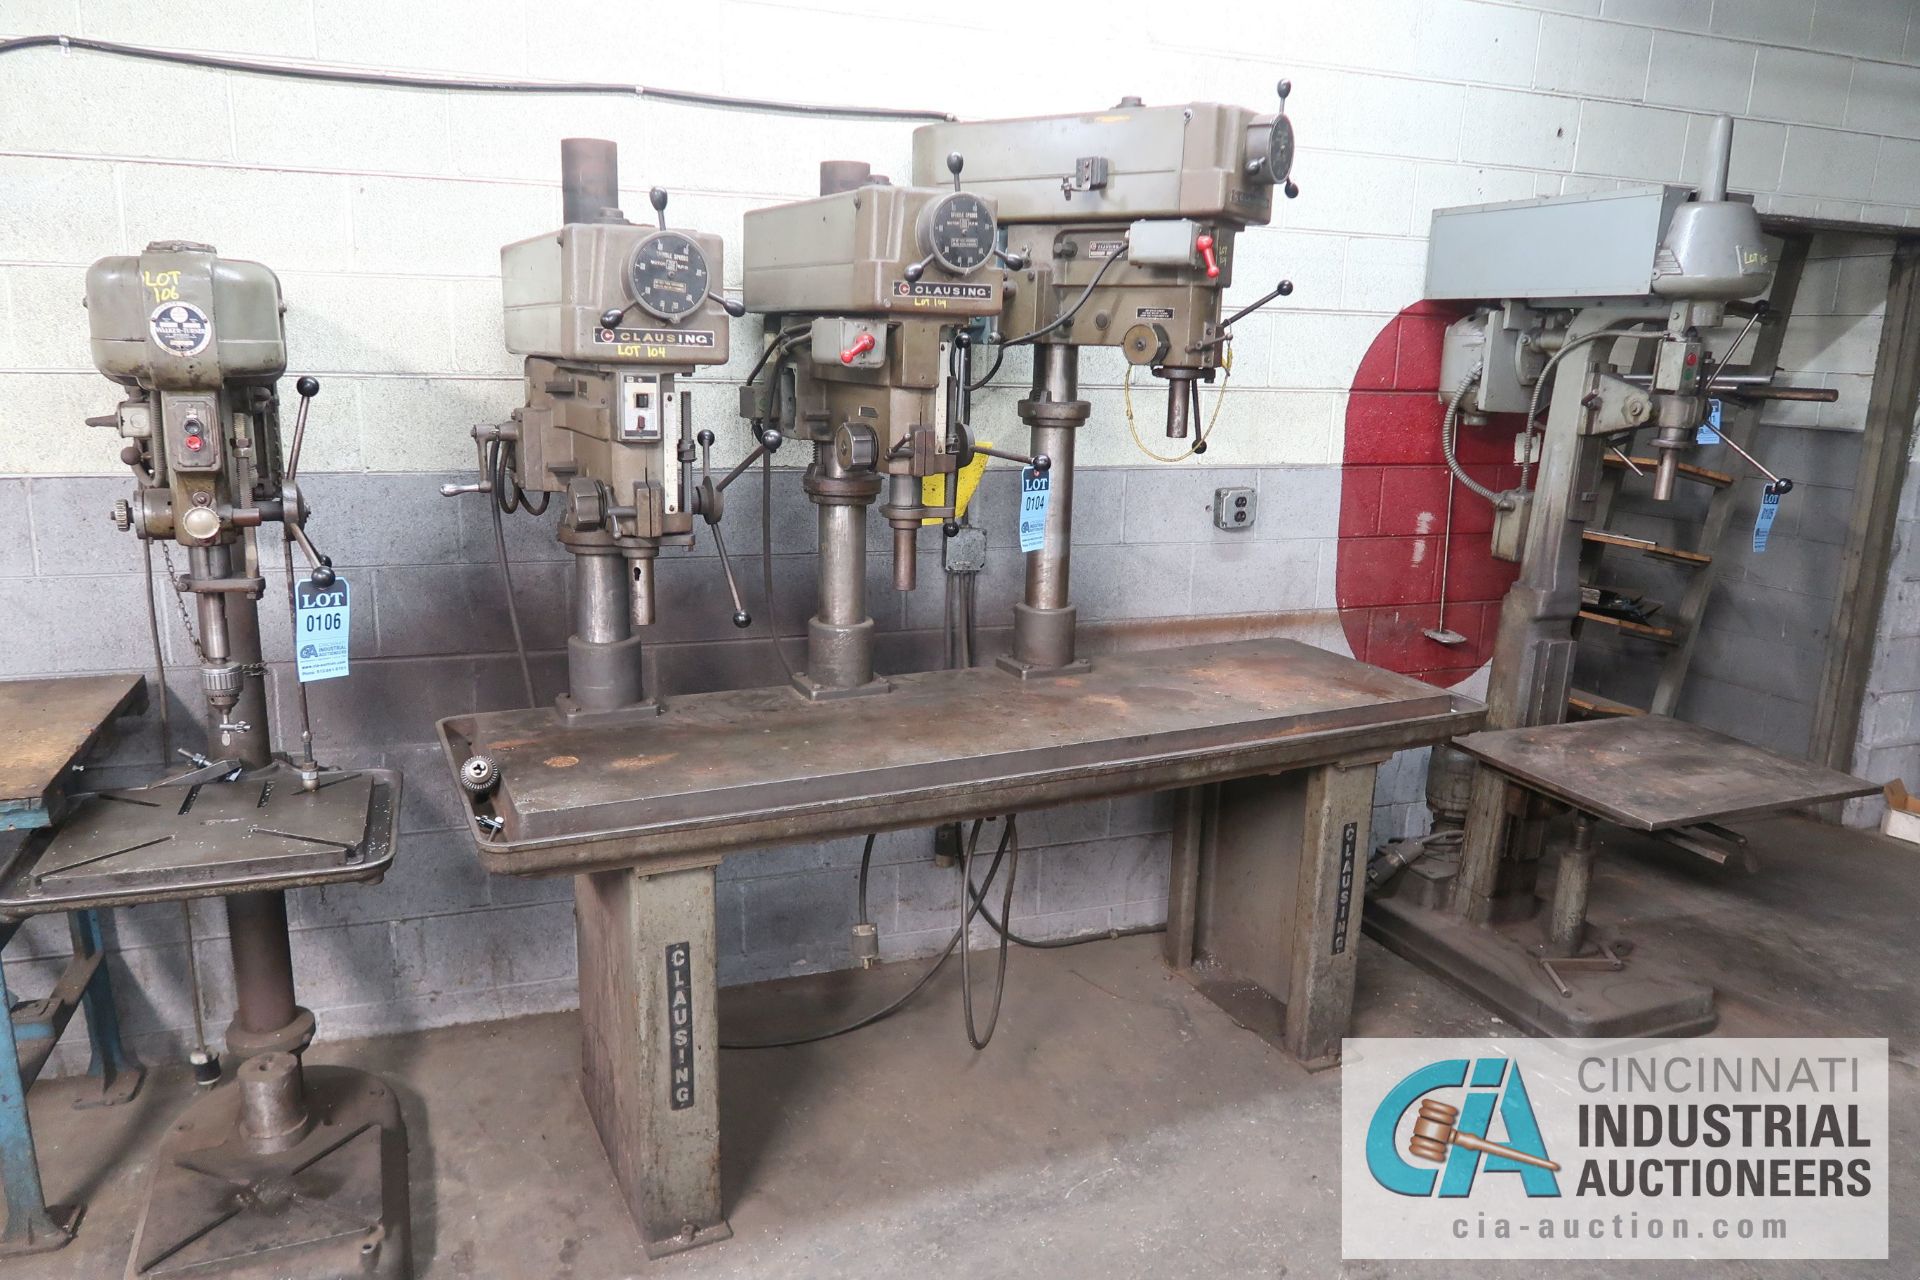 CLAUSING 3-HEAD PRODUCTION TABLE DRILLS, (2) MODEL 2286 HEADS, (1) MODEL 2284 HEADS - Image 2 of 3